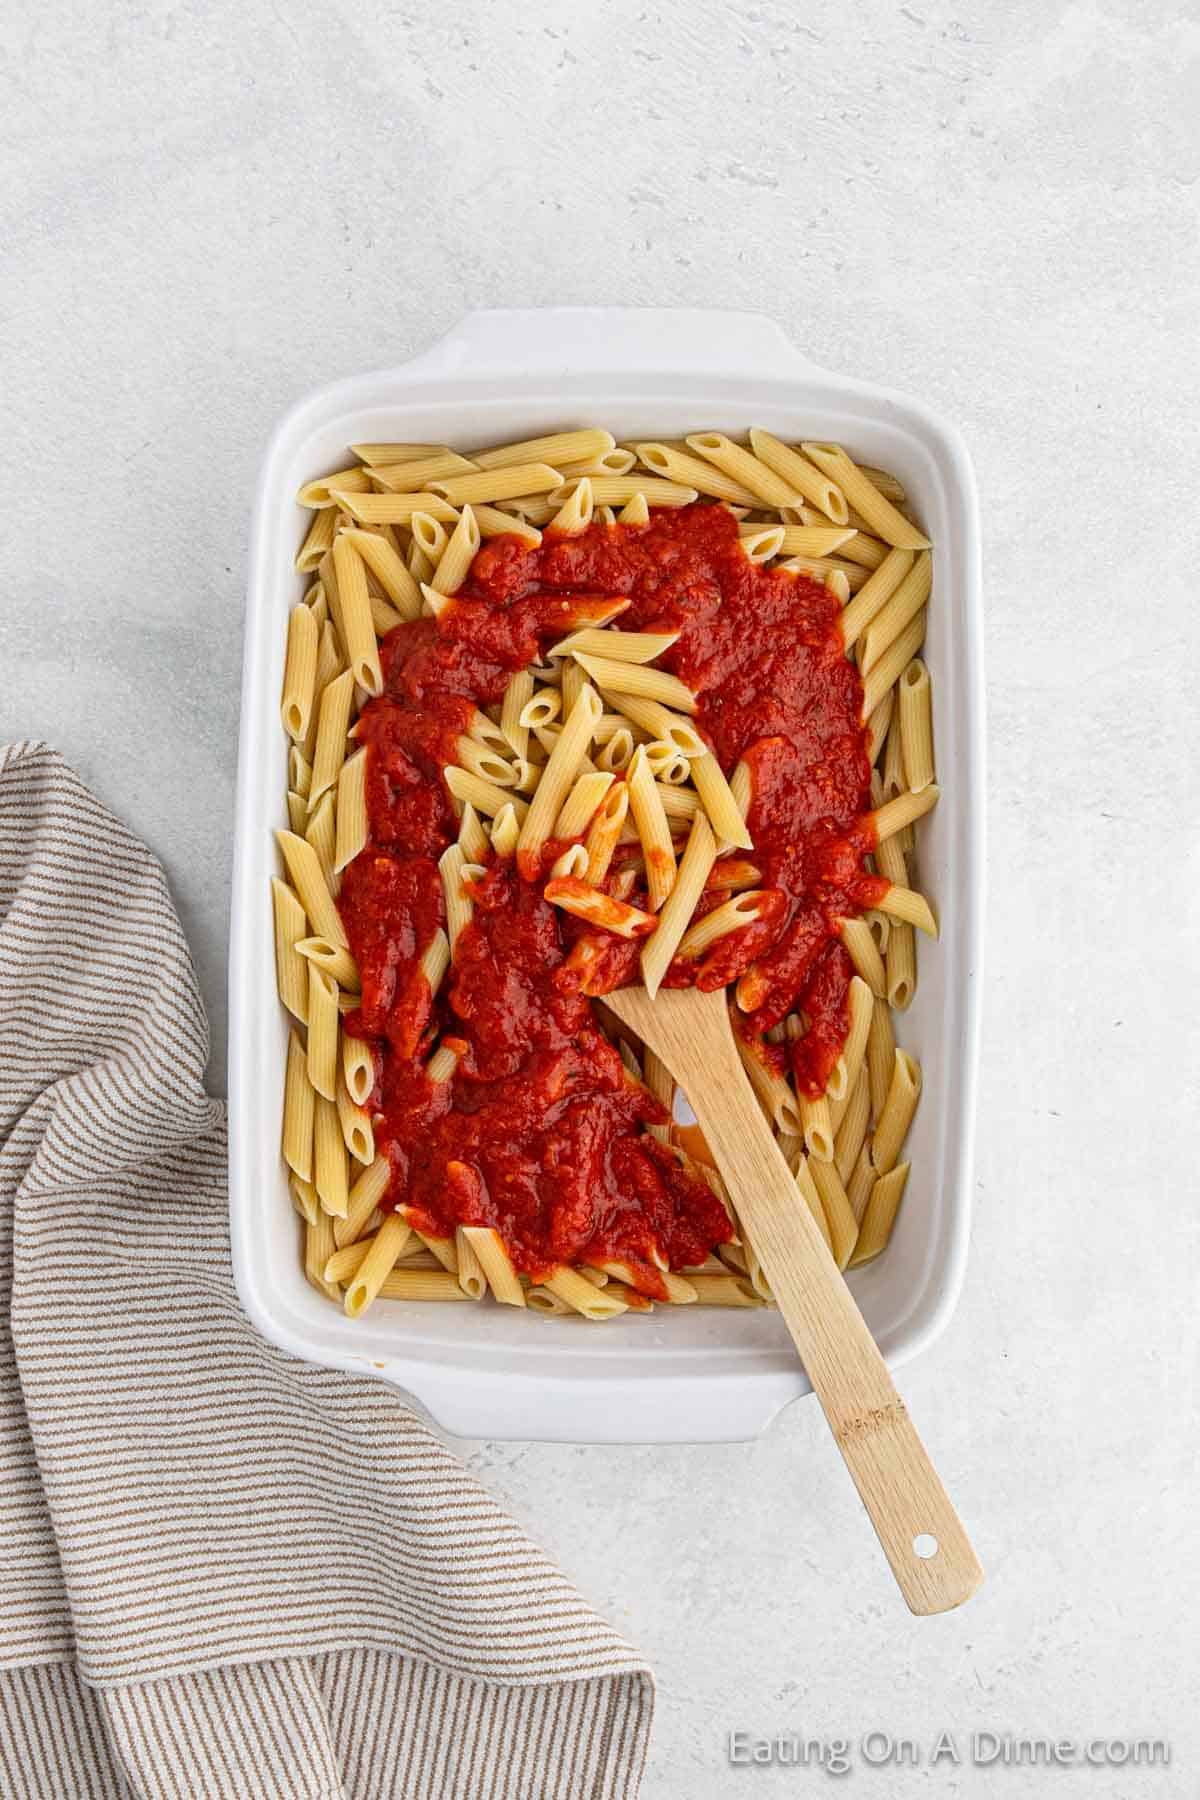 Placing the cook pasta in a baking dish and topping with sauce with a wooden spoon